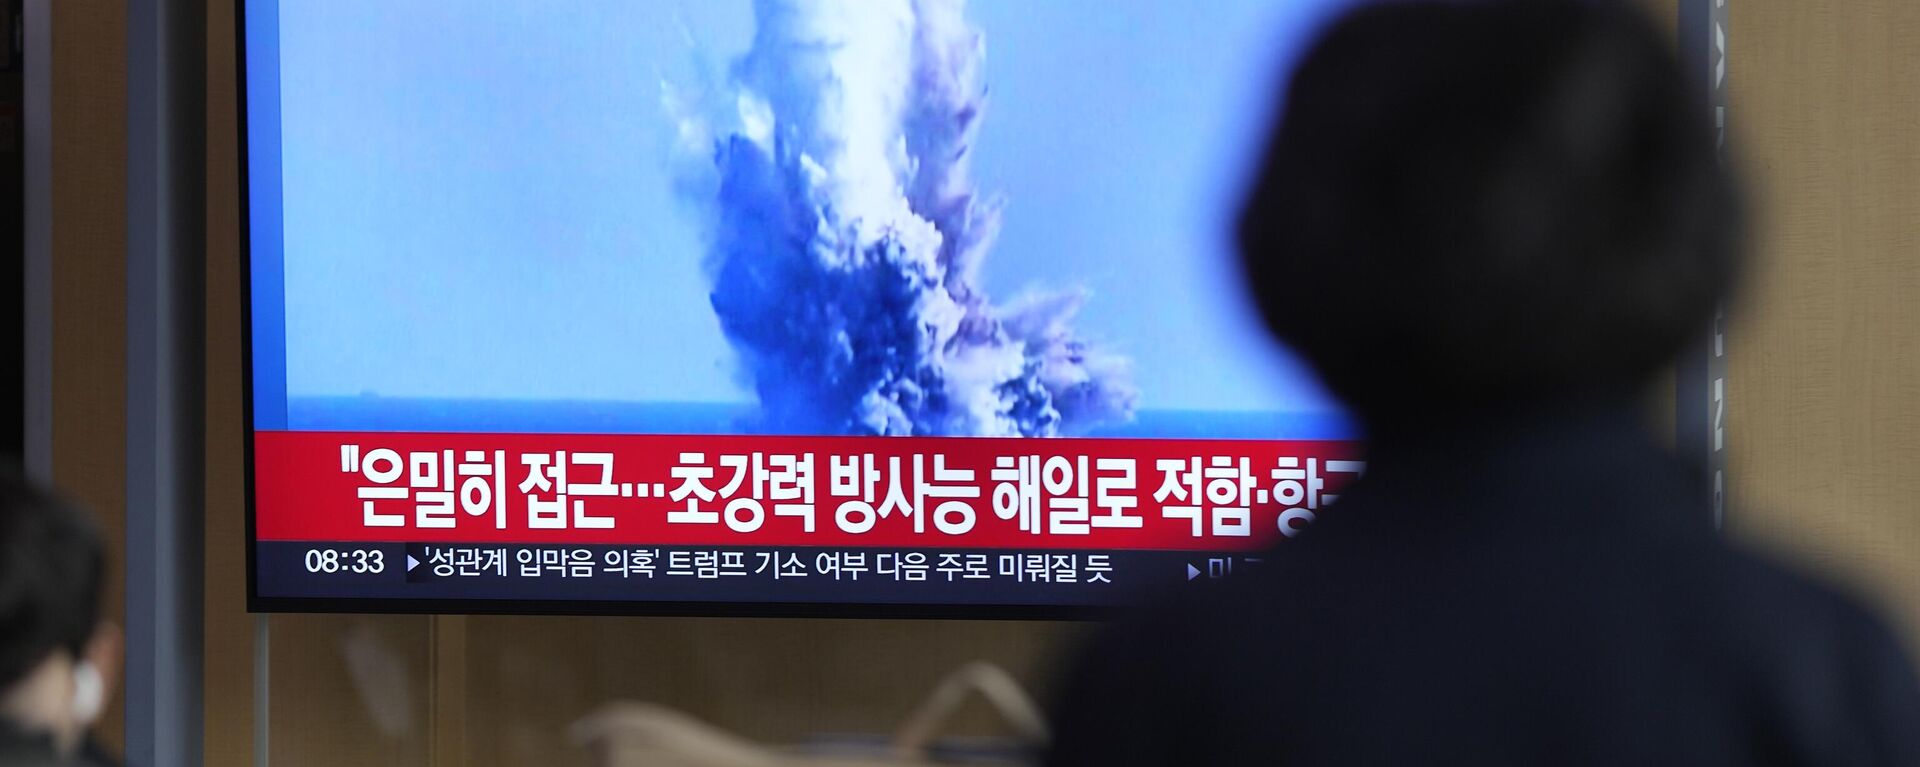 A TV screen shows a recent image released by Pyongyang’s official Korean Central News Agency during a news program at the Seoul Railway Station in Seoul, South Korea, Friday, March 24, 2023. North Korea said Friday its cruise missile launches this week were part of nuclear attack simulations that also involved a detonation by a purported underwater drone as leader Kim Jong Un vowed to make his rivals plunge into despair. - Sputnik International, 1920, 24.07.2023